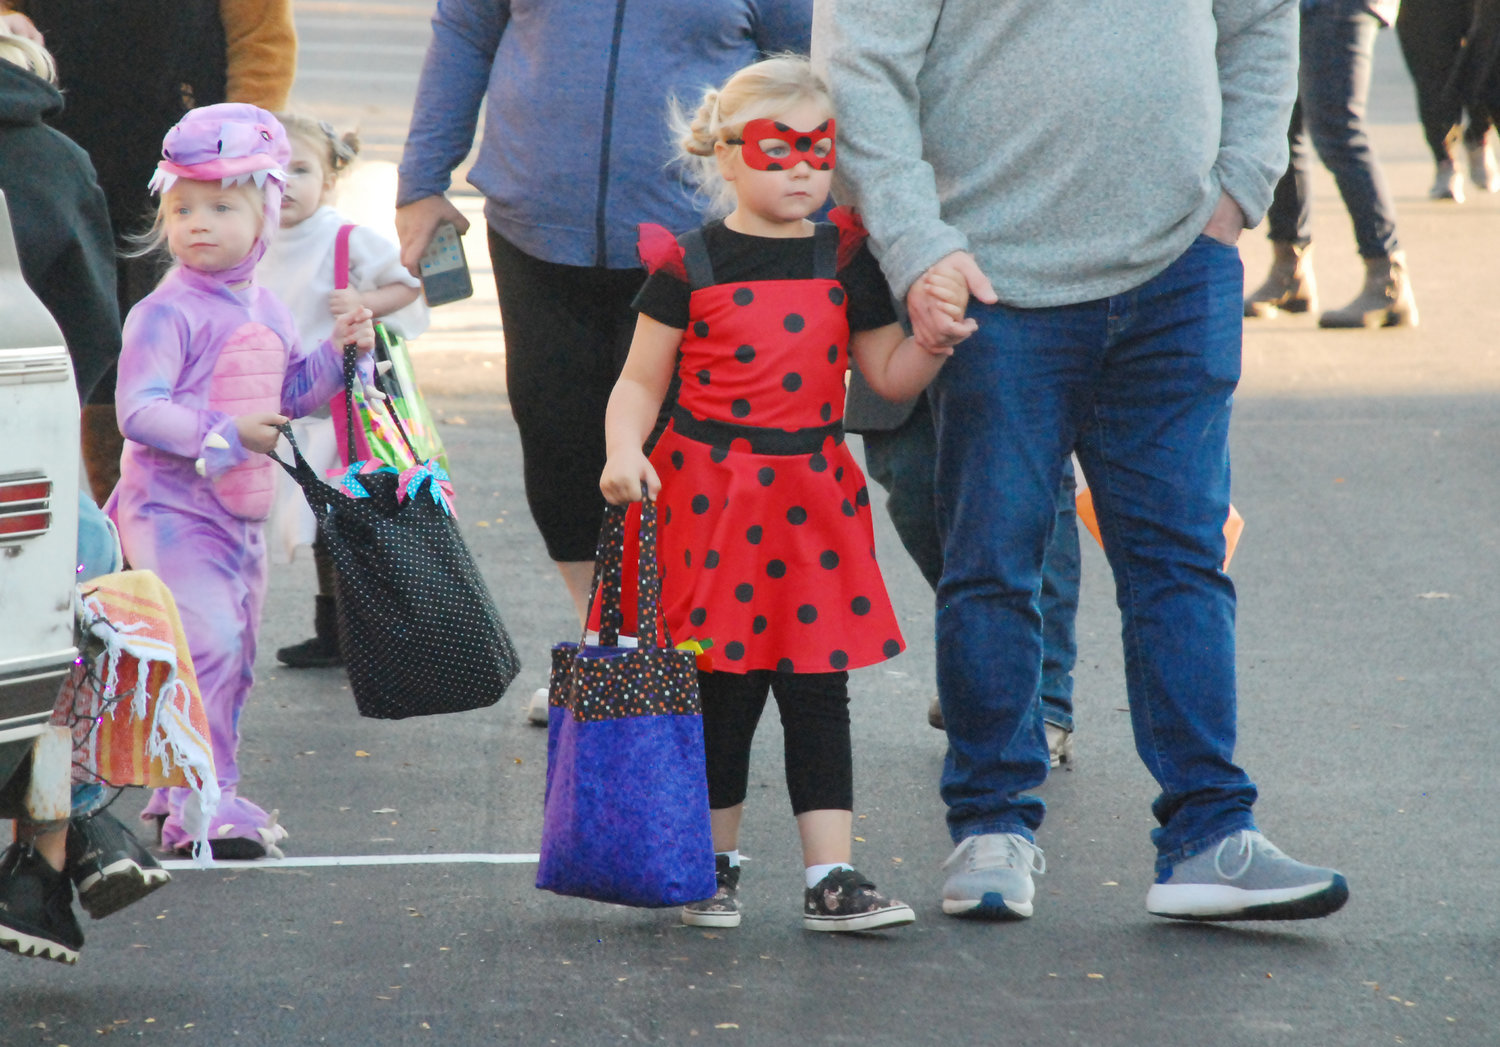 TRICK-OR-TREATERS walked around the Ozark square collecting candy from volunteers as part of a safe trick-or-treating event held annually by by the 4C Sertoma Club, participating businesses and civic organizations and emergency responders.